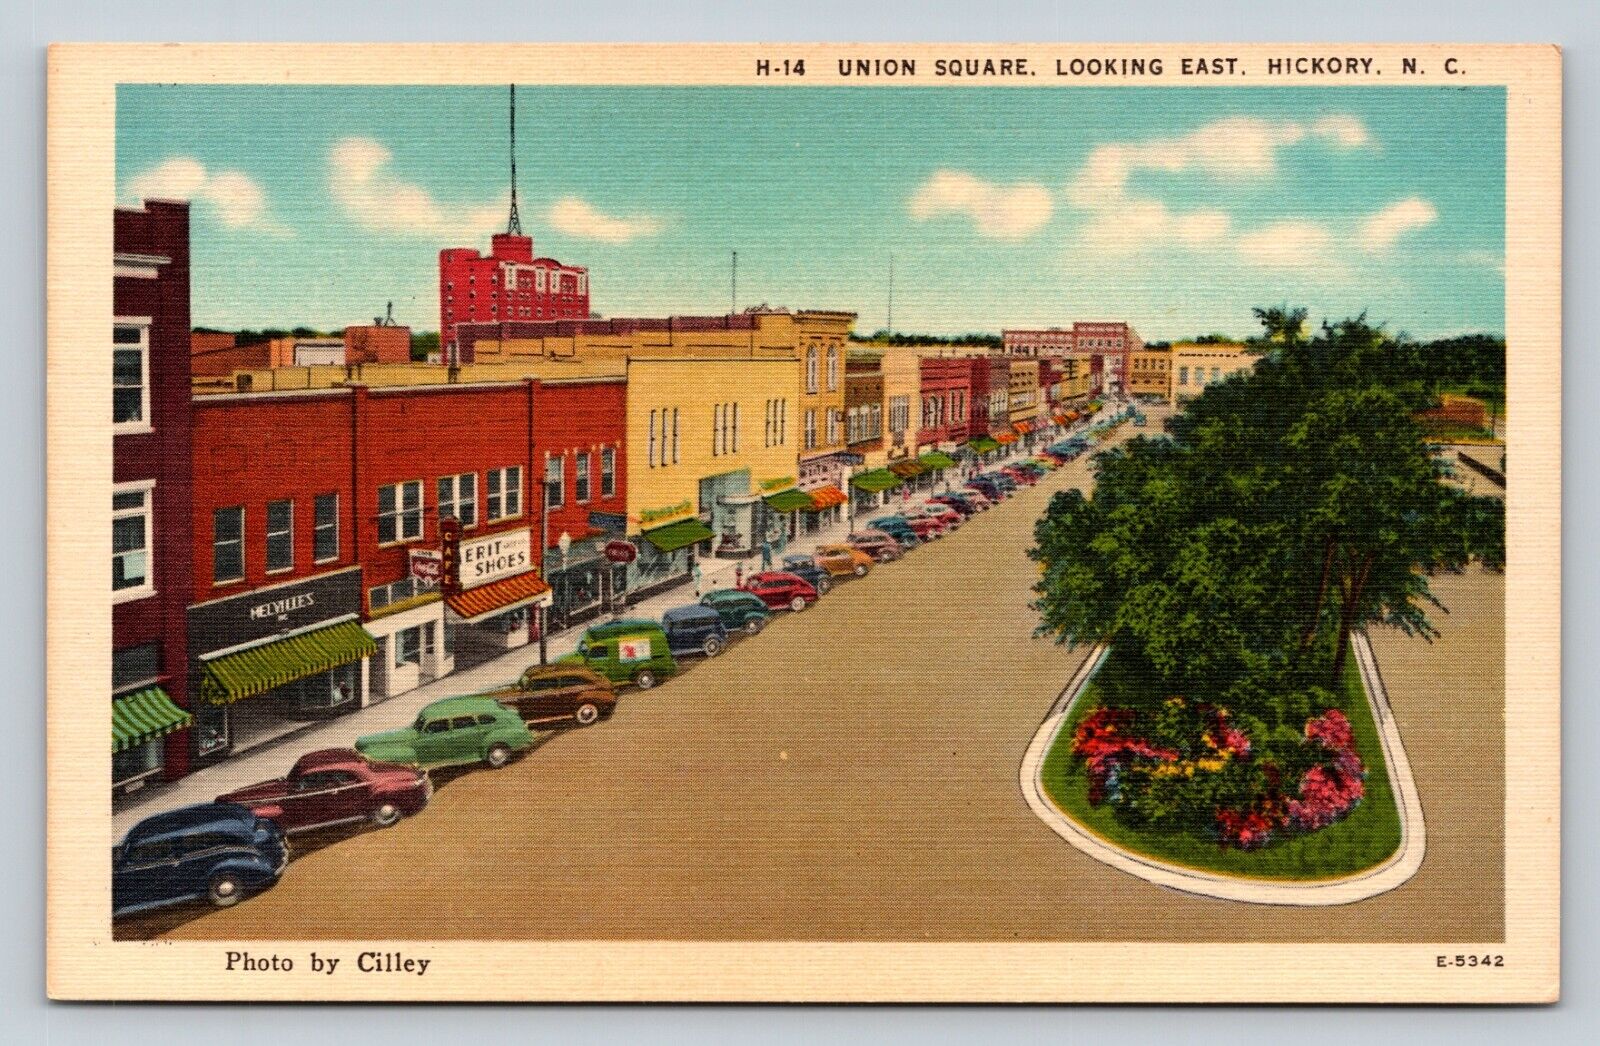 Hickory North Carolina NC Union Square VINTAGE Linen Postcard Photo by Cilley